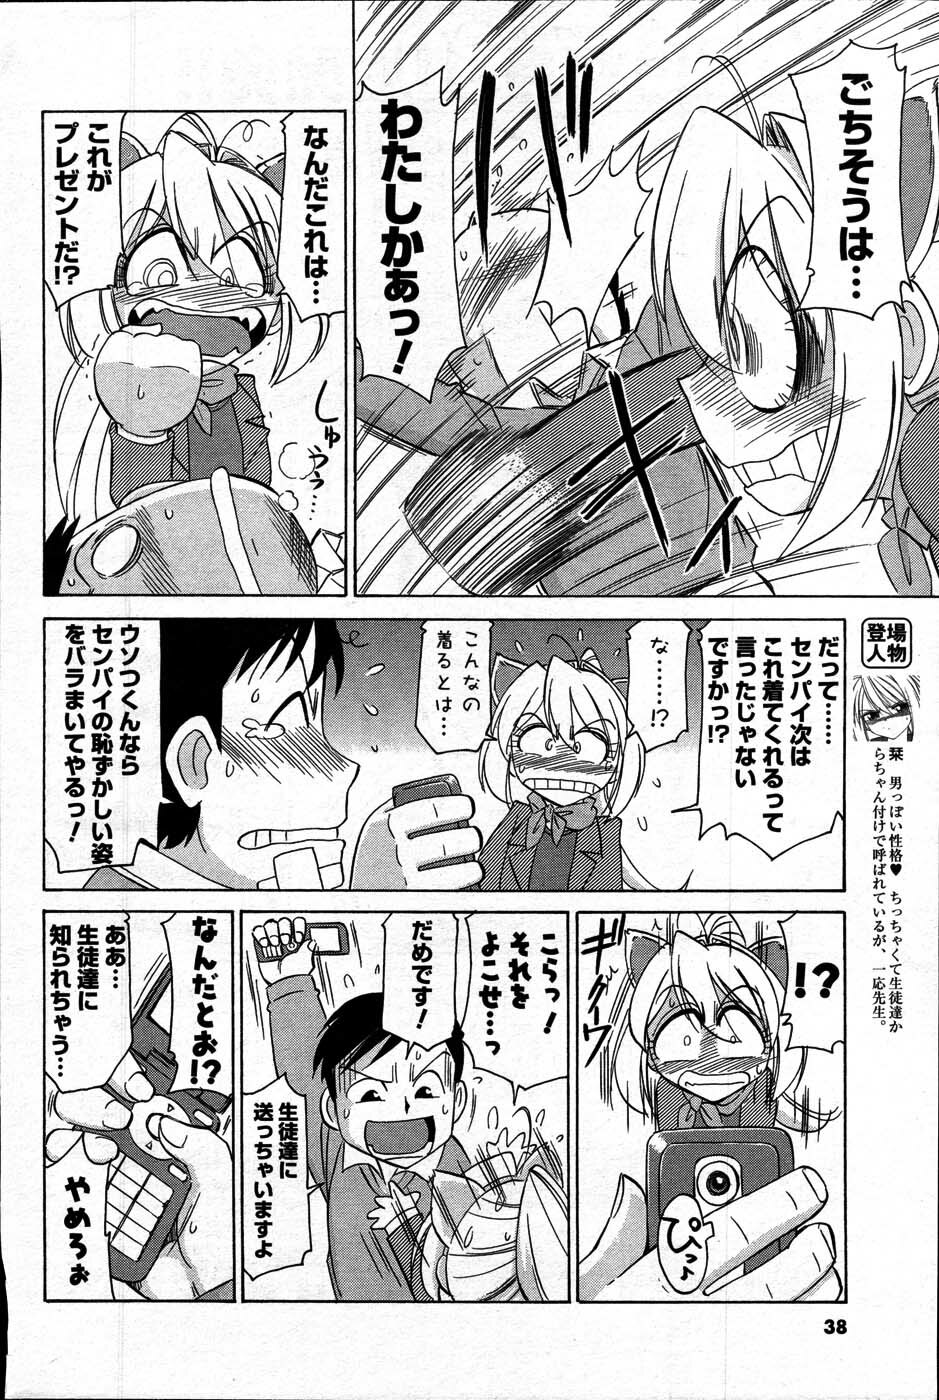 Comic Mens Young Special IKAZUCHI vol. 2 page 36 full